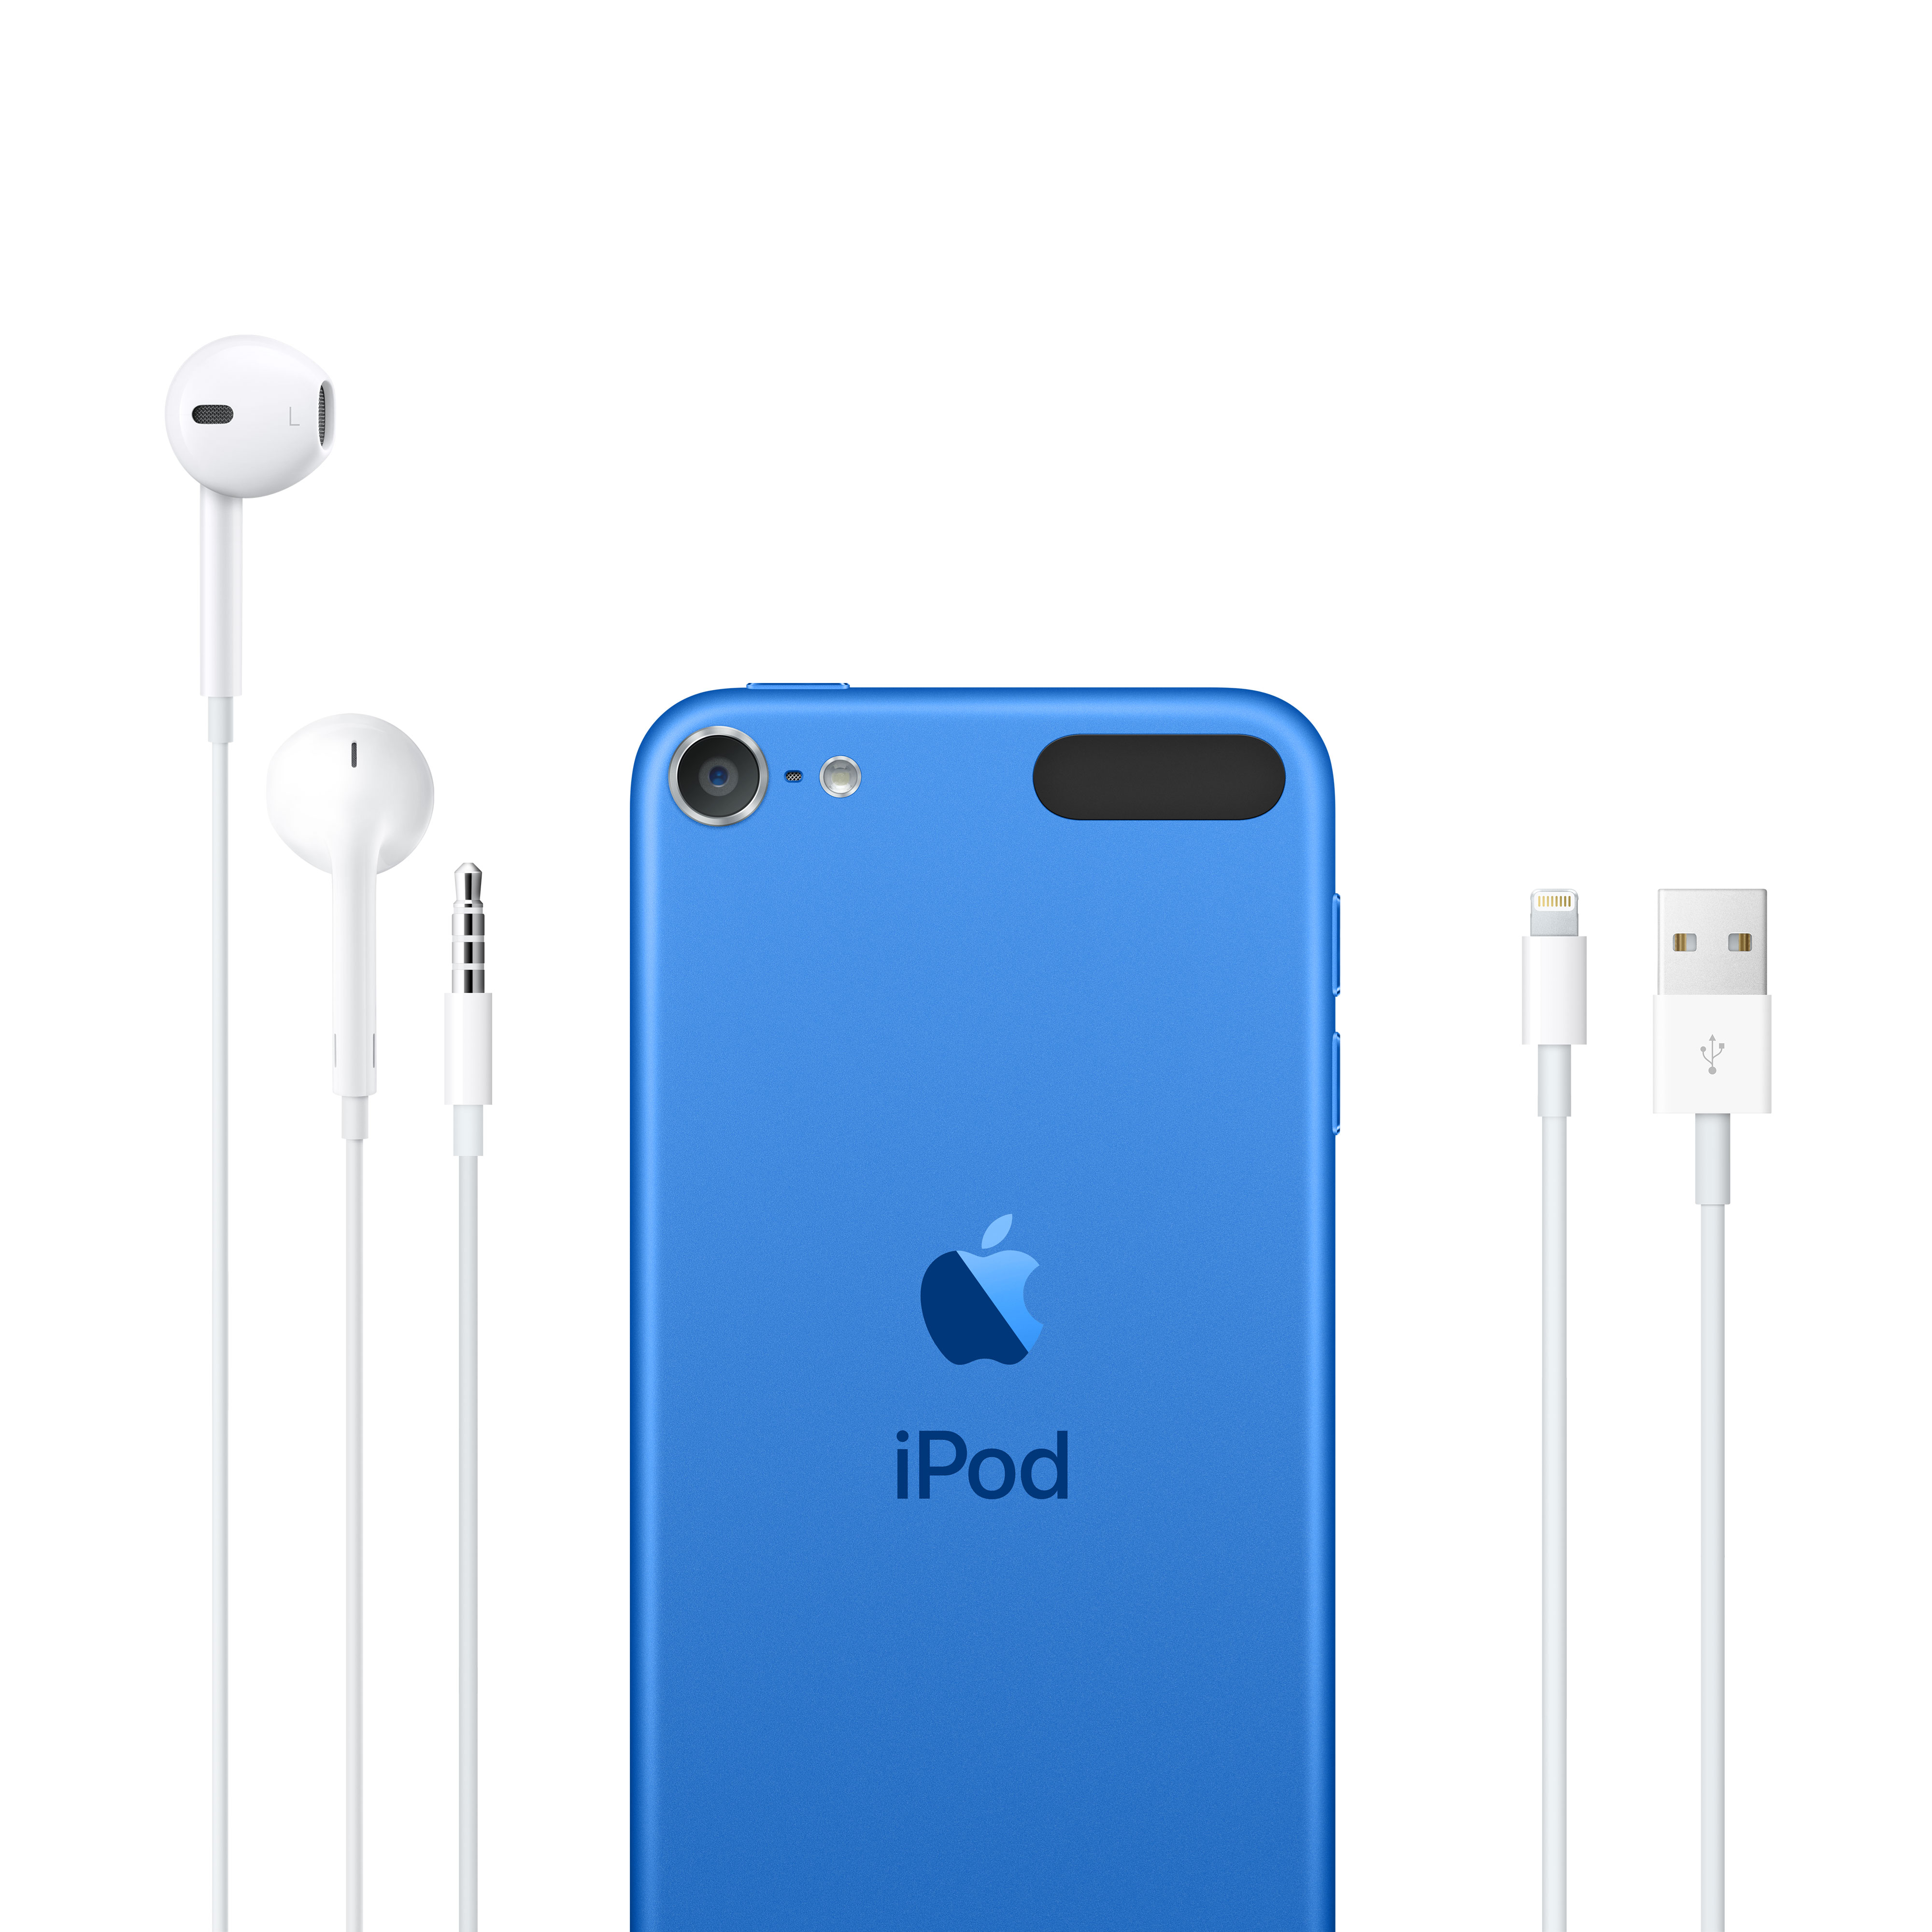 Restored Apple iPod touch 7th Generation 128GB - Blue (Refurbished) - image 5 of 6